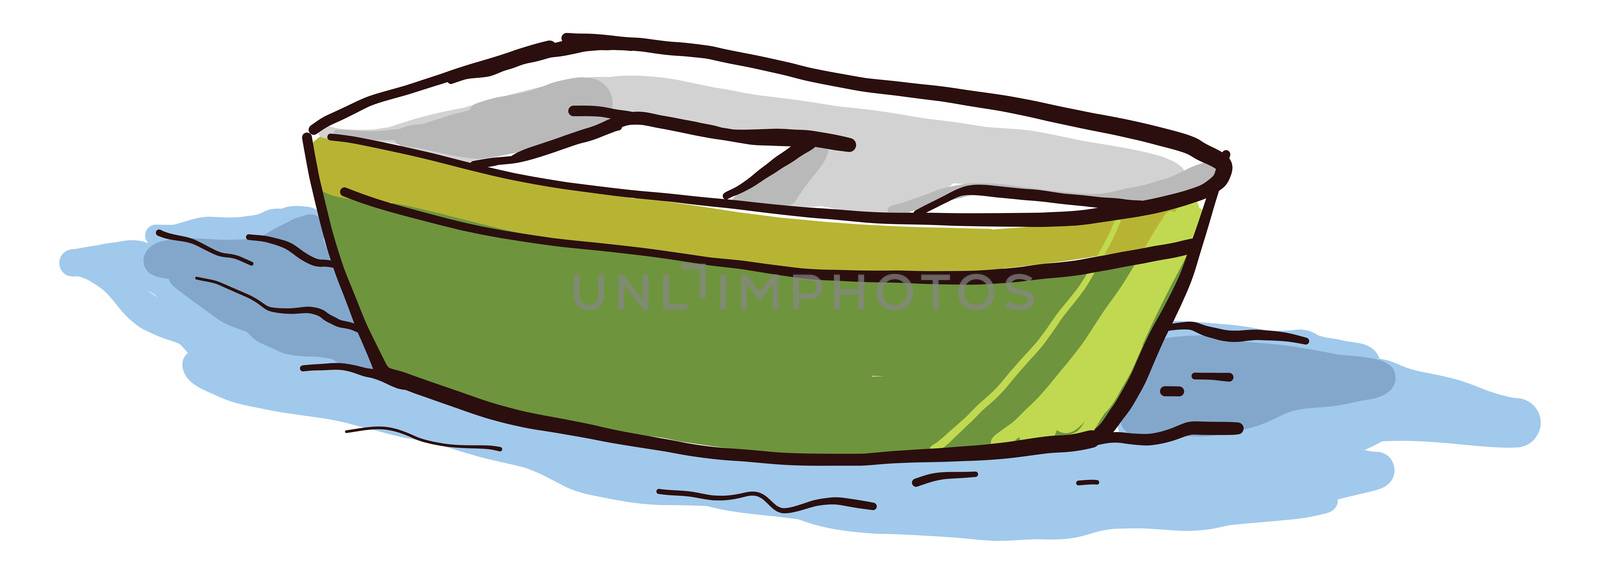 Green small boat , illustration, vector on white background